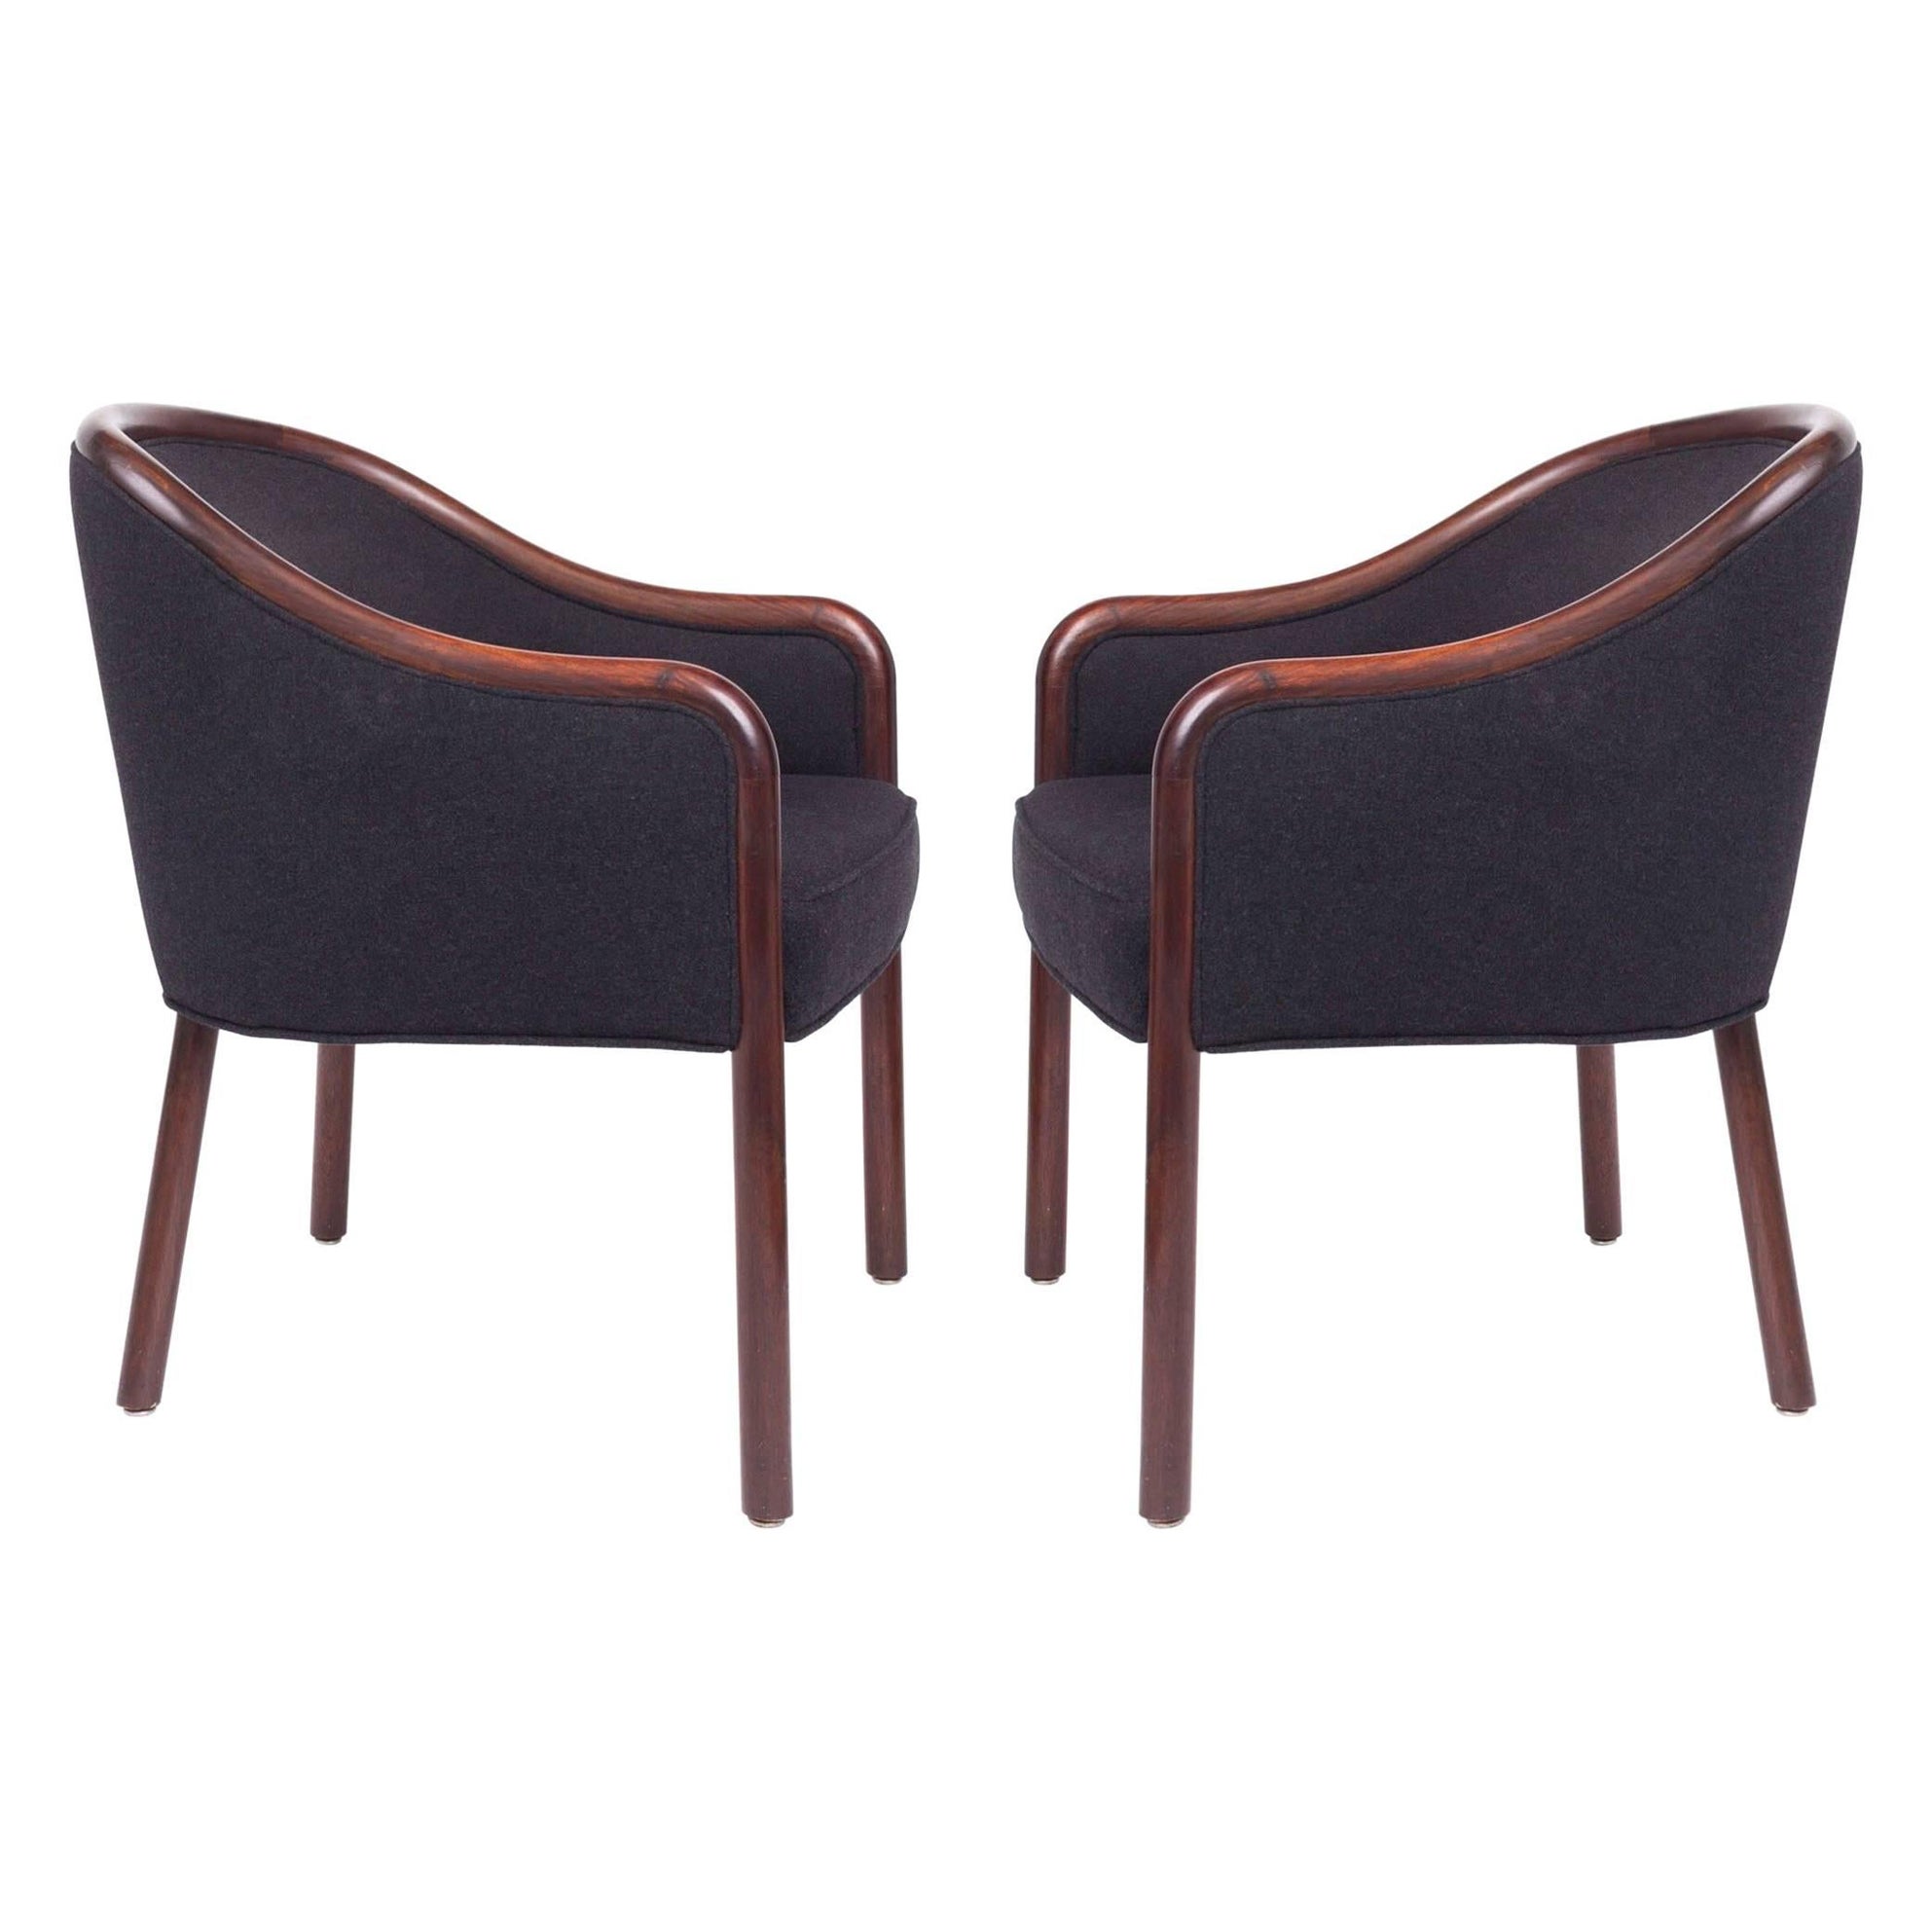 Pair of Shapely Upholstered Bentwood Club Chairs by Ward Bennett, 1960s For Sale